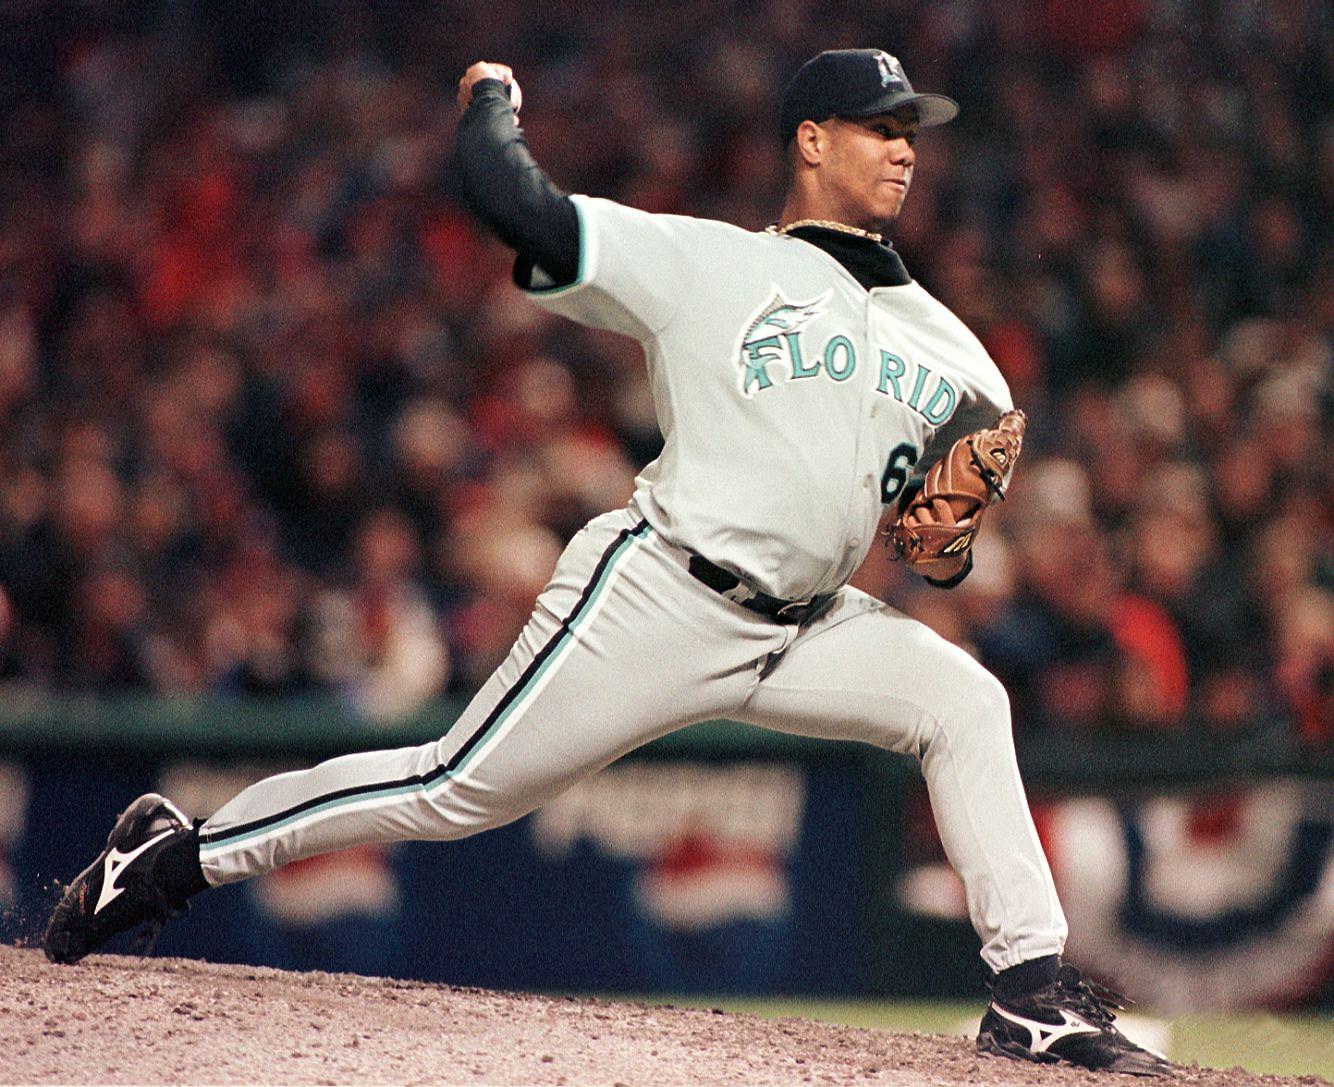 Livan was a perfect 4-0 in the '97 Postseason. He was named MVP of both the NLCS and the World Series, striking out 26 batters in his five playoff appearances. (Source: TIMOTHY A. CLARY/AFP/Getty Images)